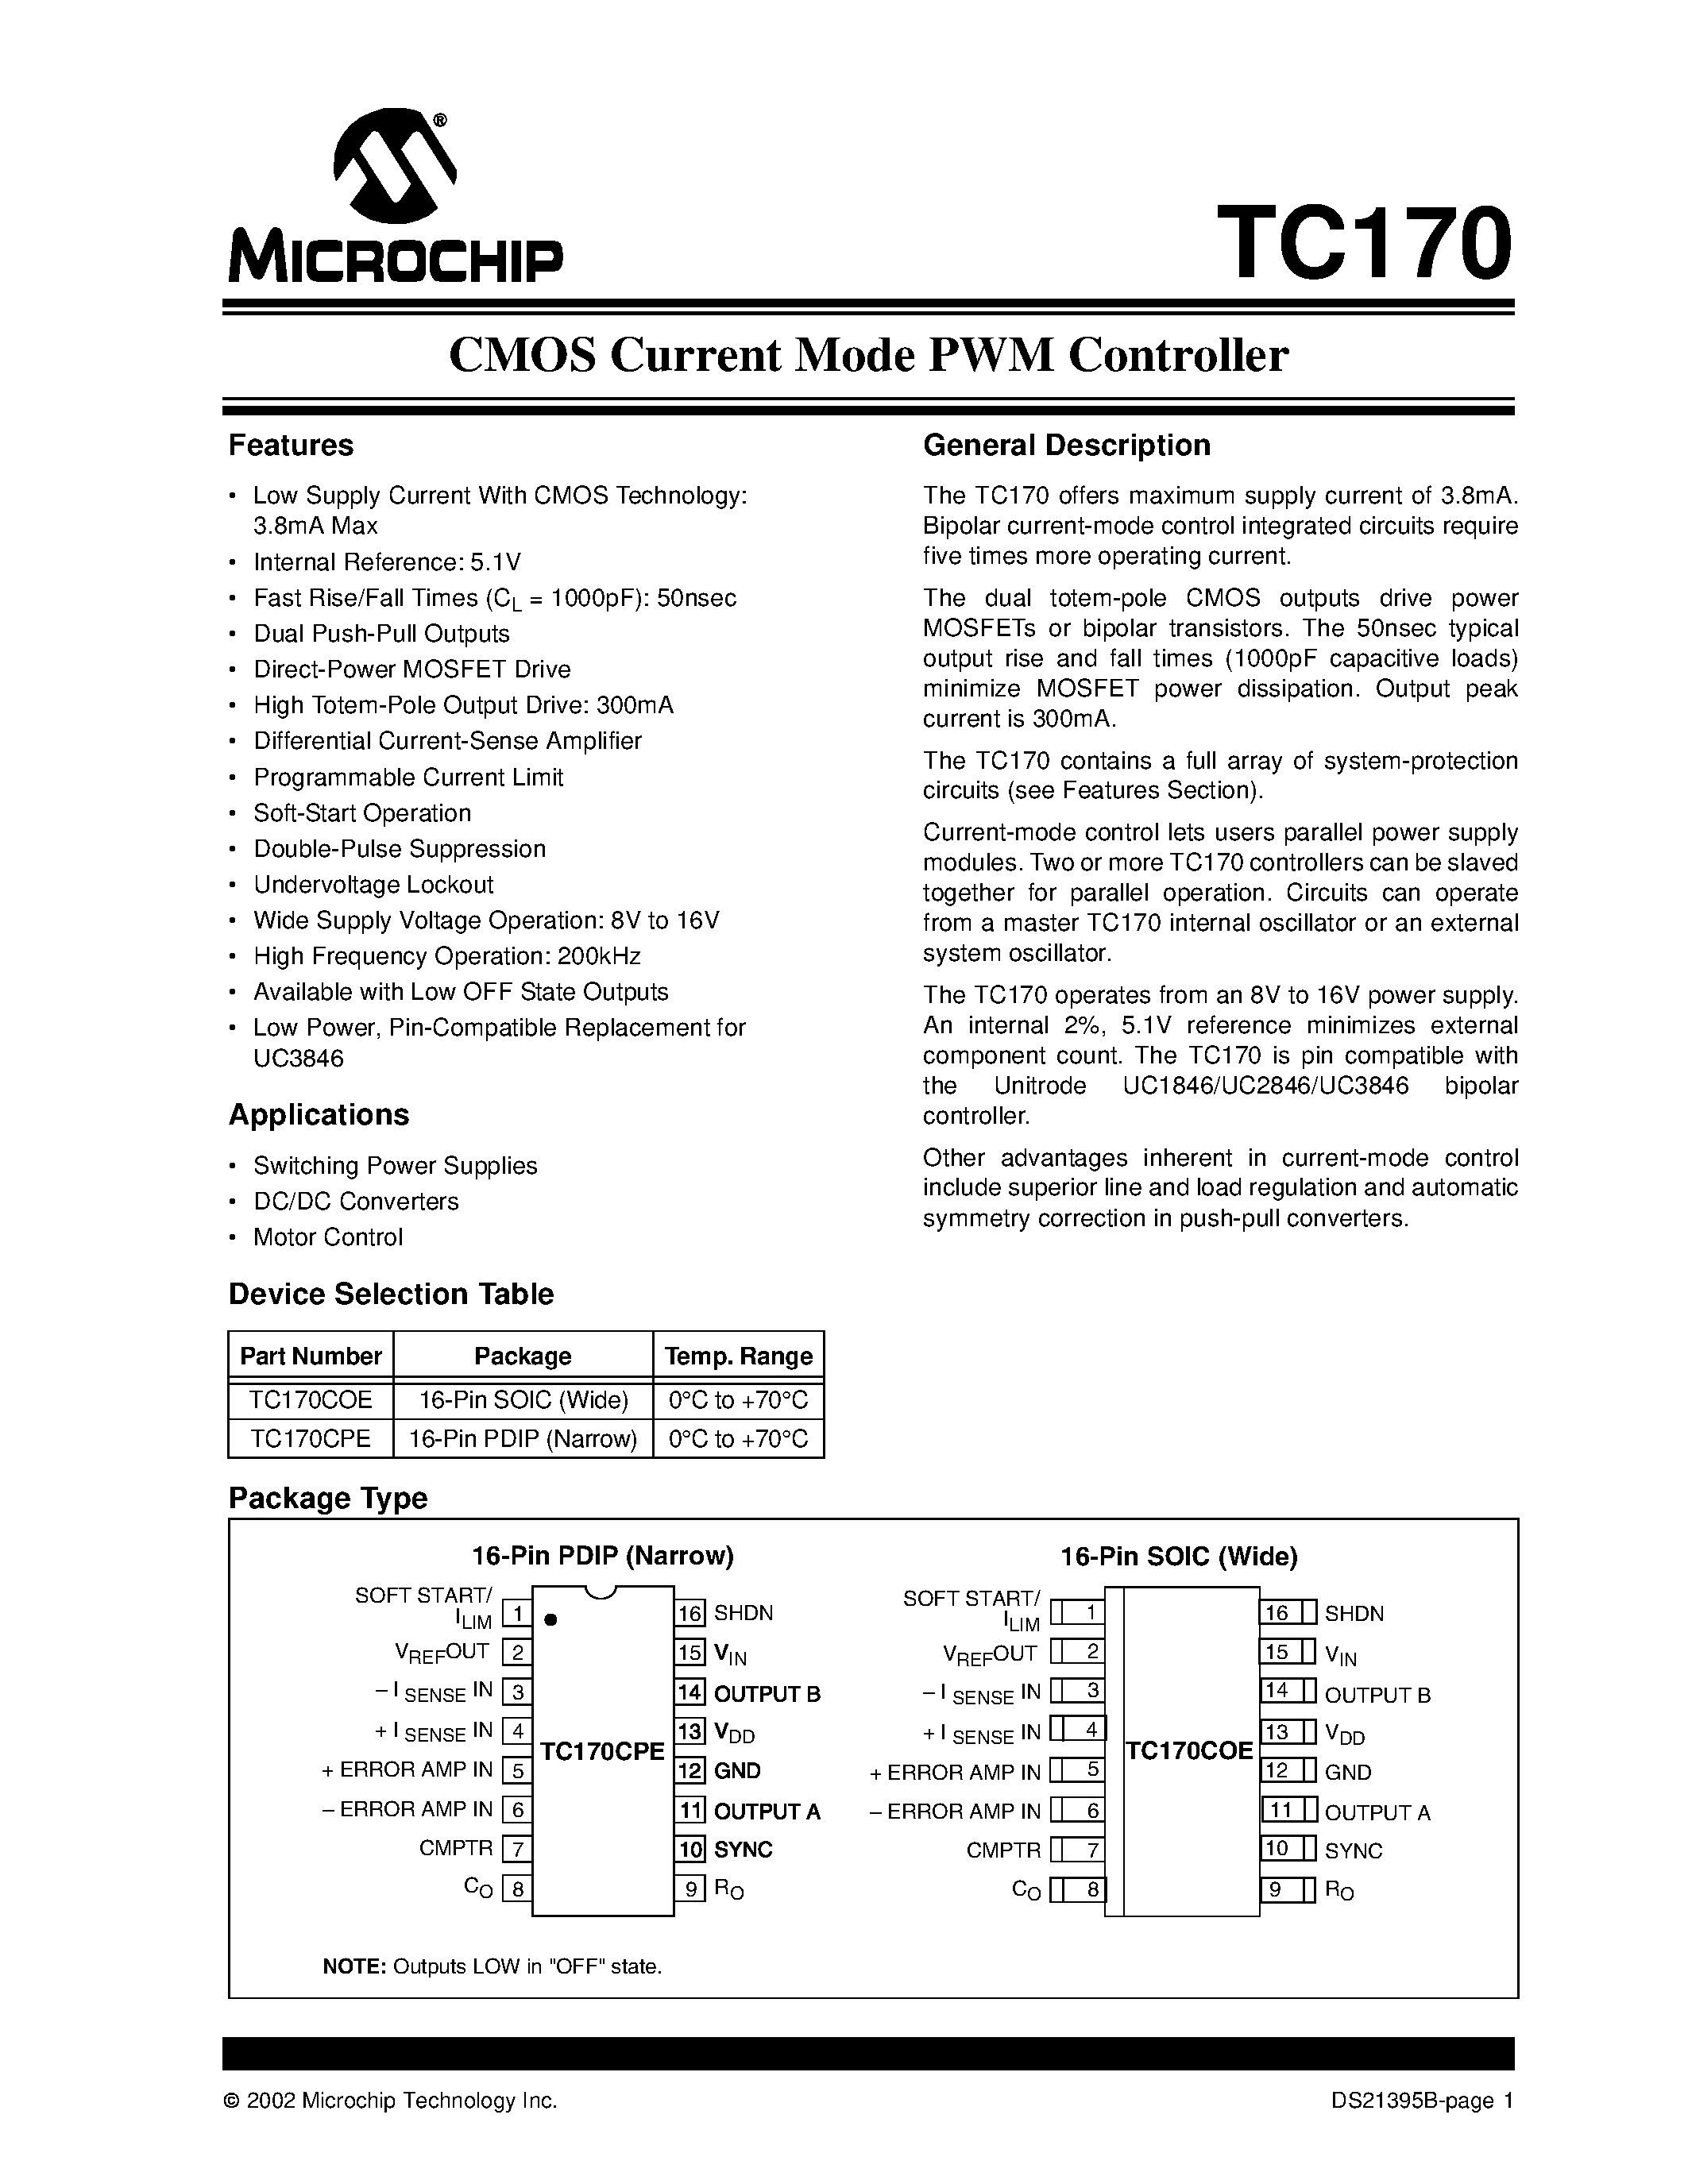 Datasheet TC170 - CMOS Current Mode PWM Controller page 1